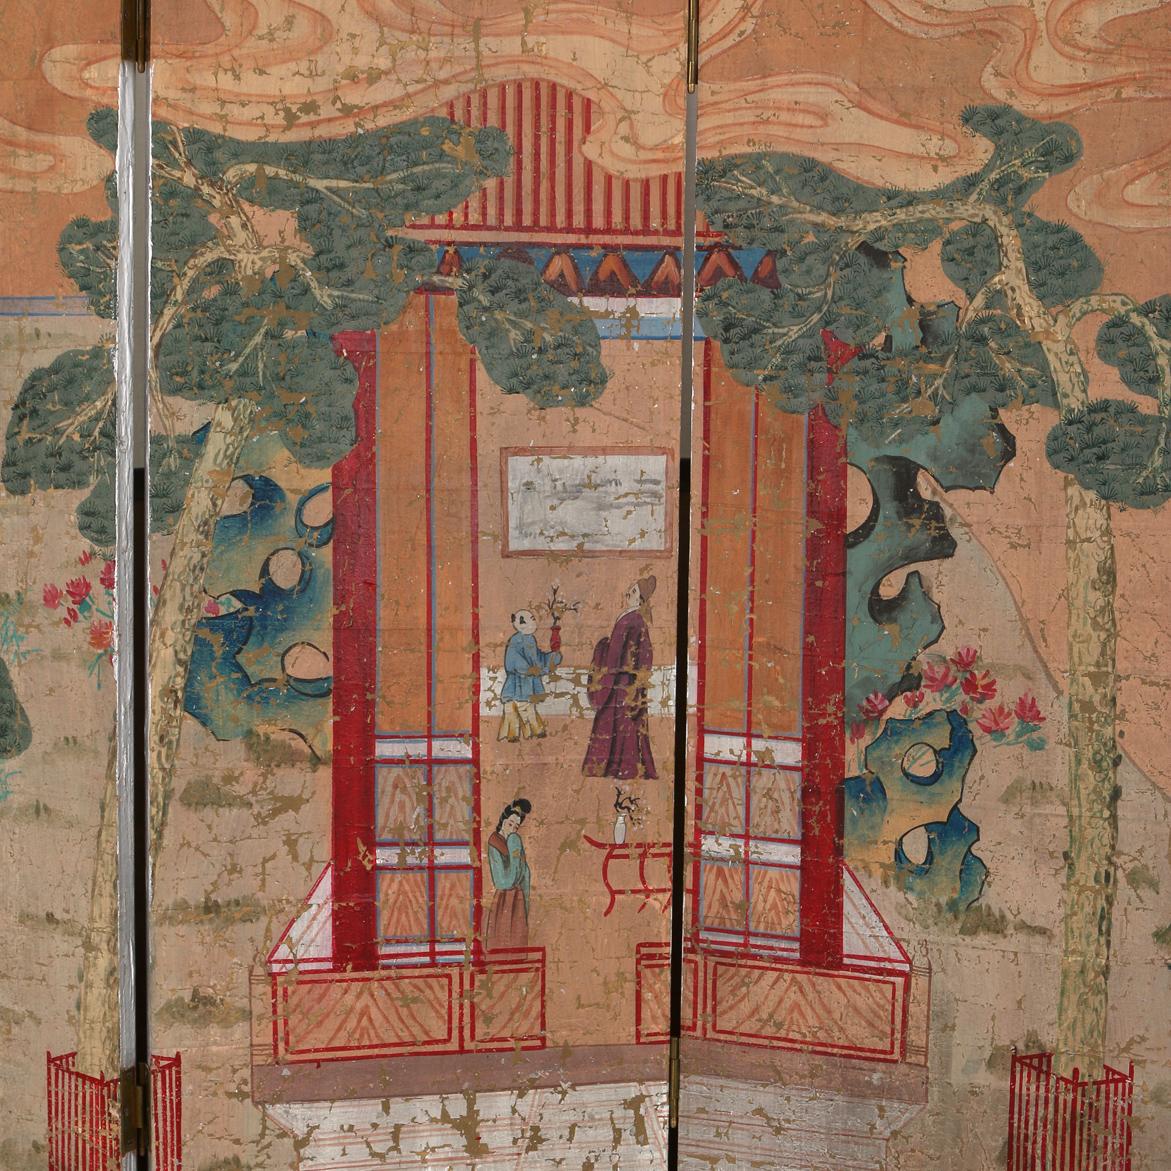 A super chic Monumental Antique 8 Panel Hand Painted Chinese Screen depicting Chinese landscape and scenery with pagodas. The screen includes (8) 16